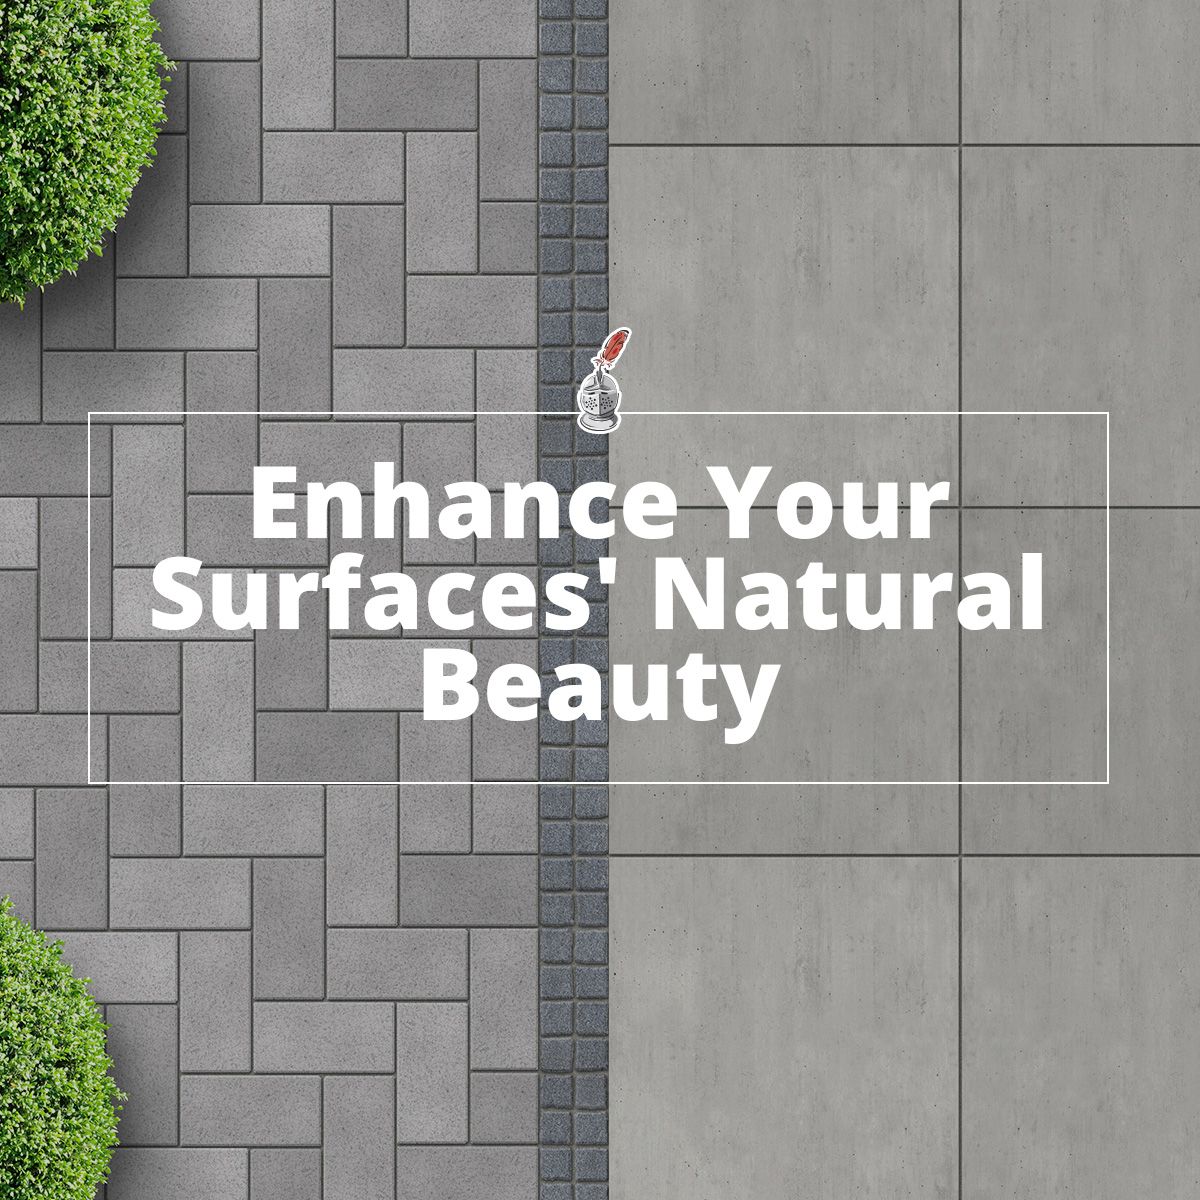 Enhance Your Surfaces' Natural Beauty